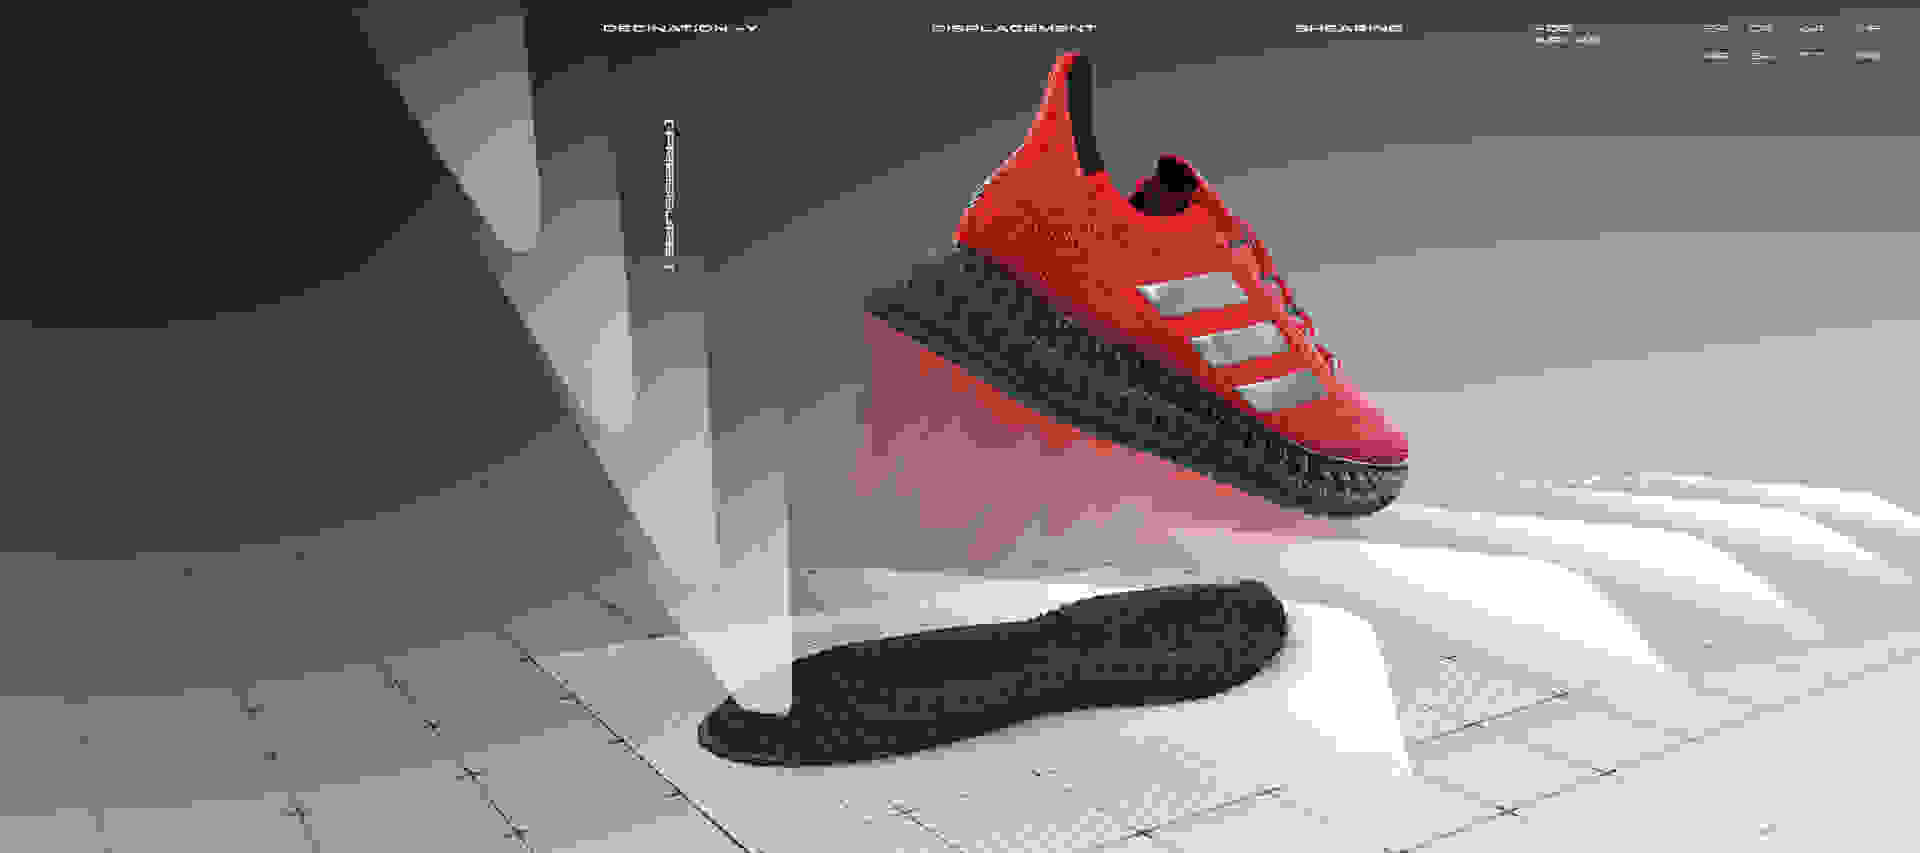 The 4DFWD running shoe stepping forward while a seperate 3D printed lattice midsole shears forward underneath the shoe.